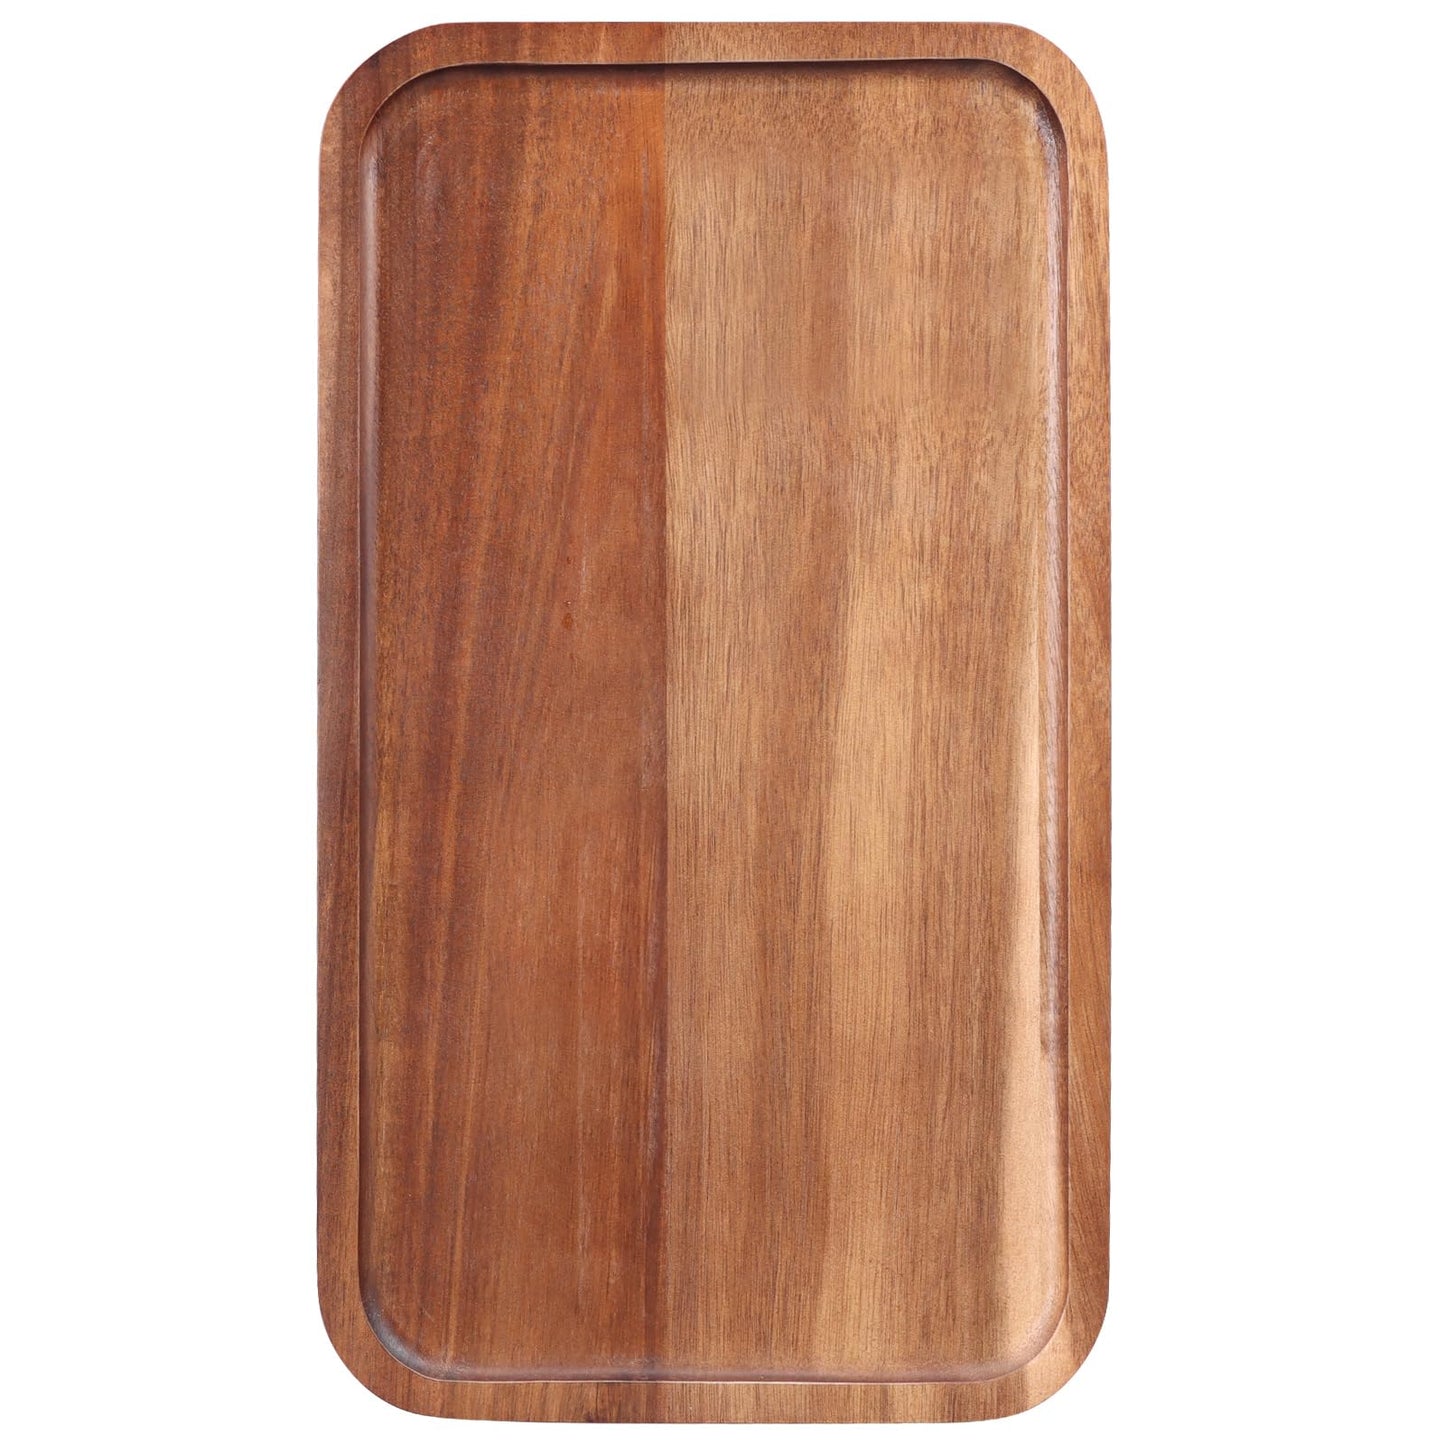 Medium Acacia Wood Serving Trays Long Charcuterie Boards Wood Snack Platter Rectangular Cookie Appetizer Plates Serving Cheese Board Rectangle